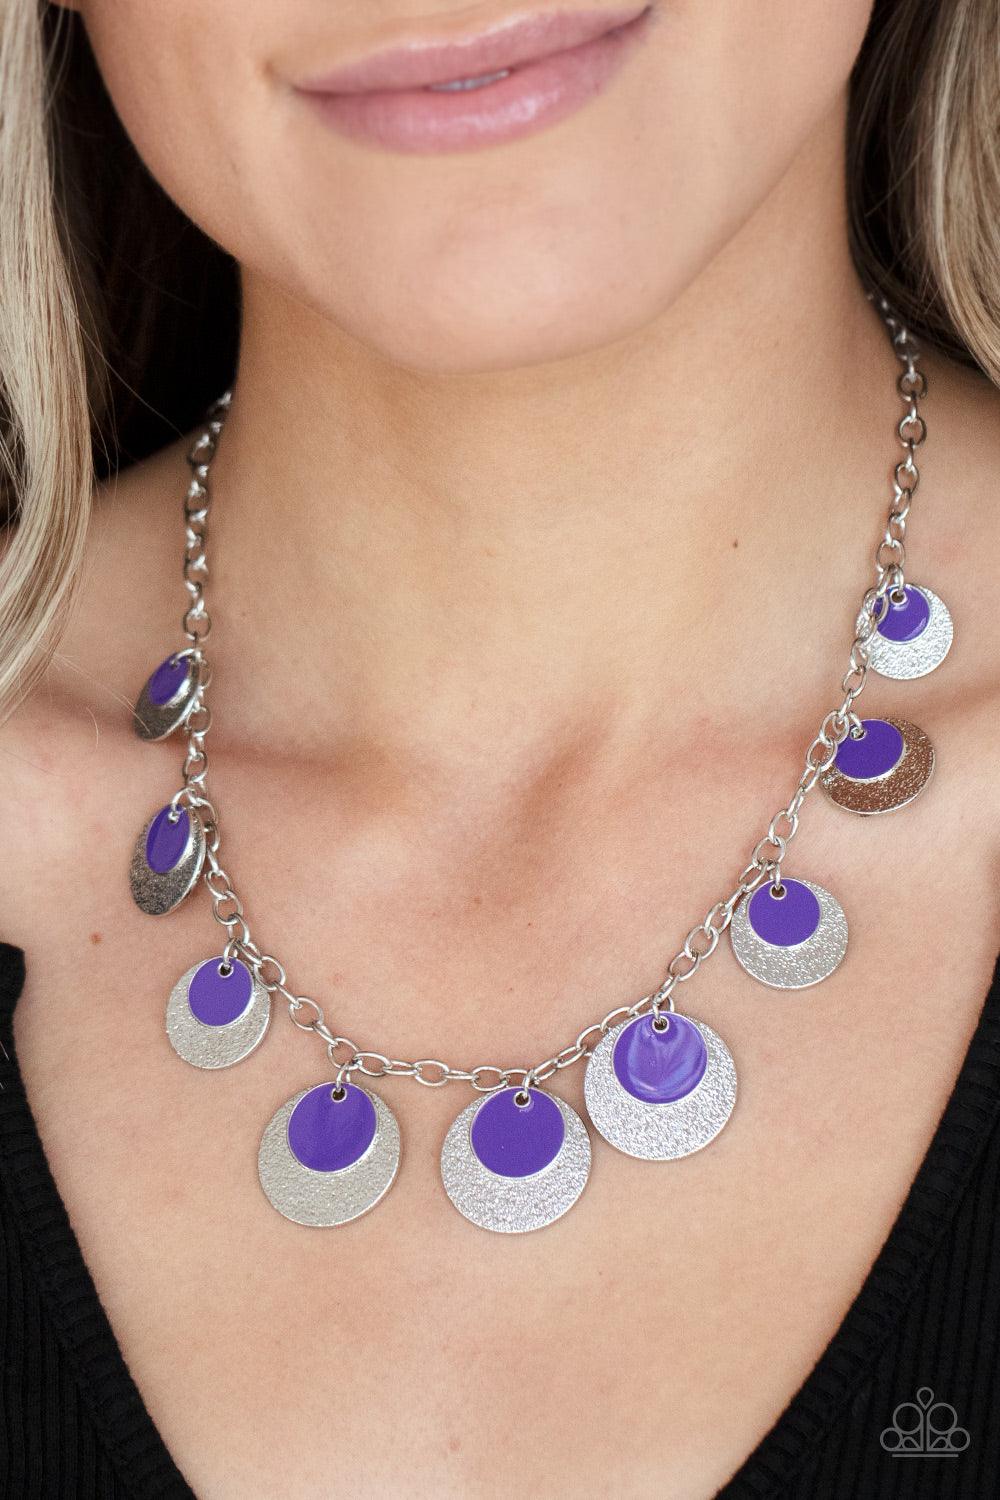 The Cosmos Are Calling Purple Necklace - Jewelry by Bretta